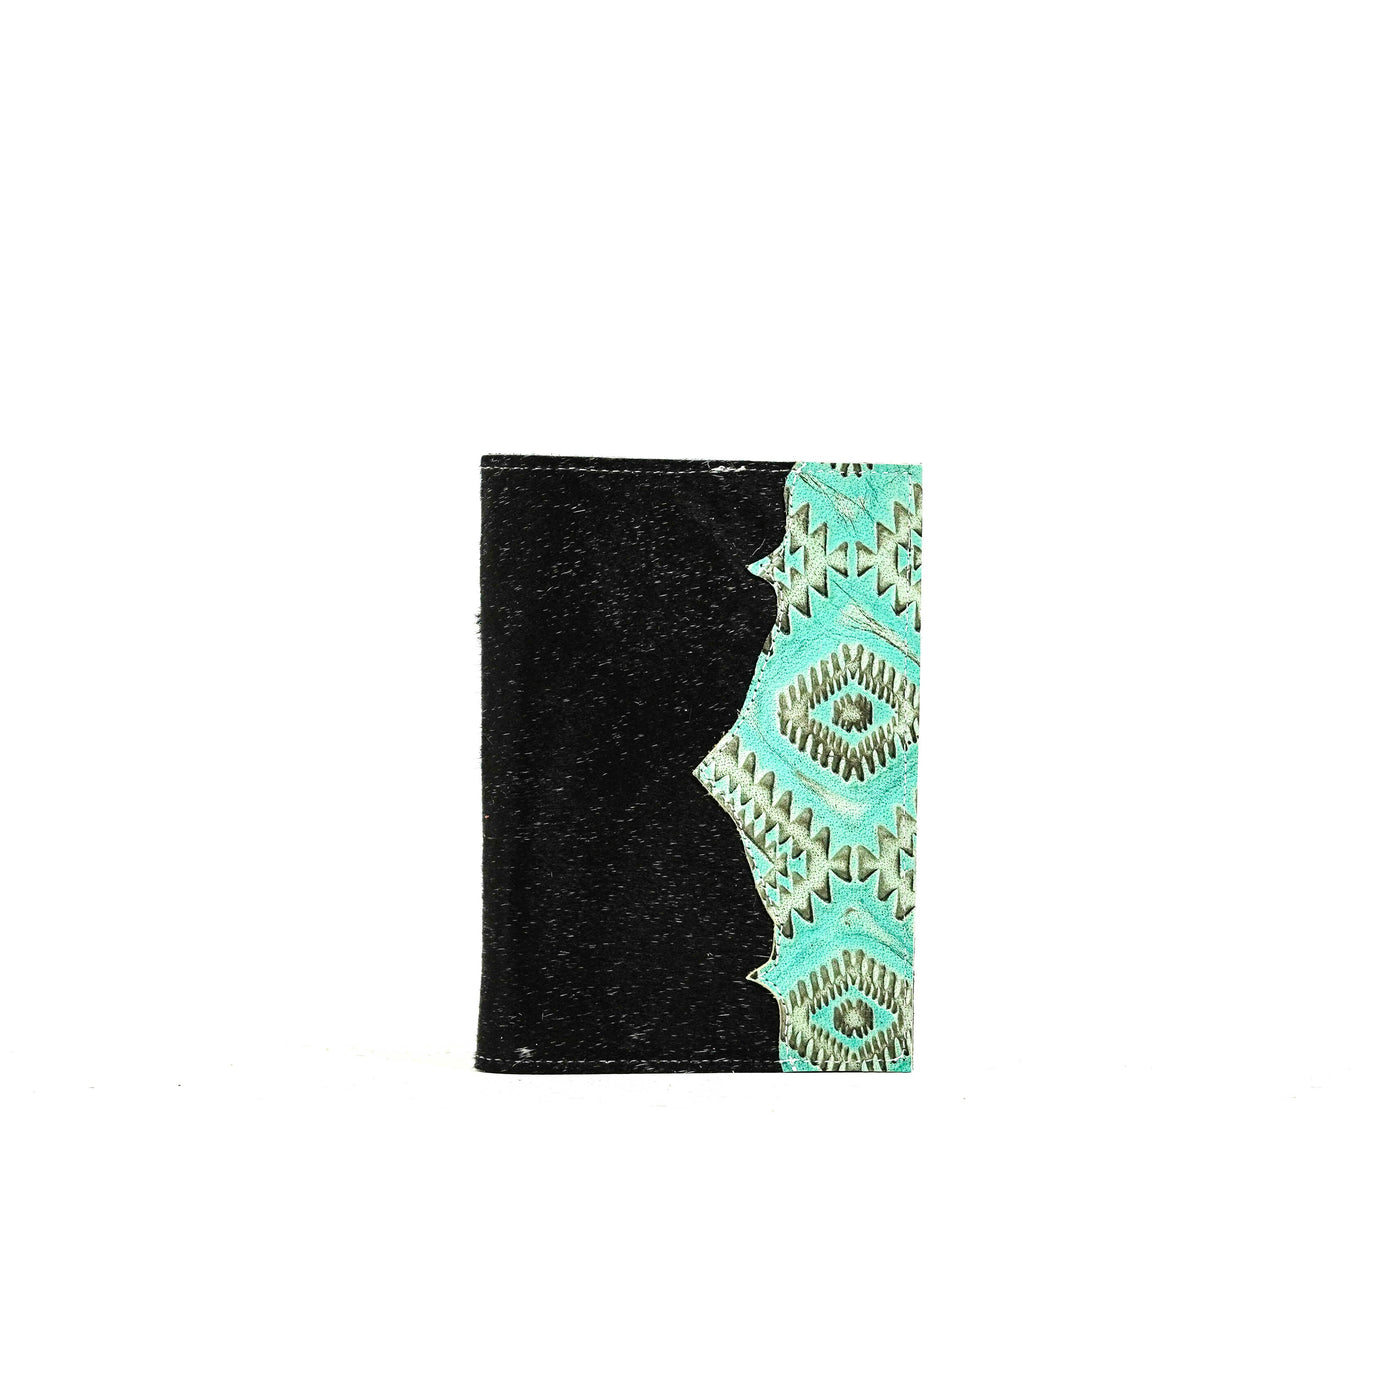 Small Notepad Cover - Dark Brindle w/ Turquoise Sand Aztec-Small Notepad Cover-Western-Cowhide-Bags-Handmade-Products-Gifts-Dancing Cactus Designs